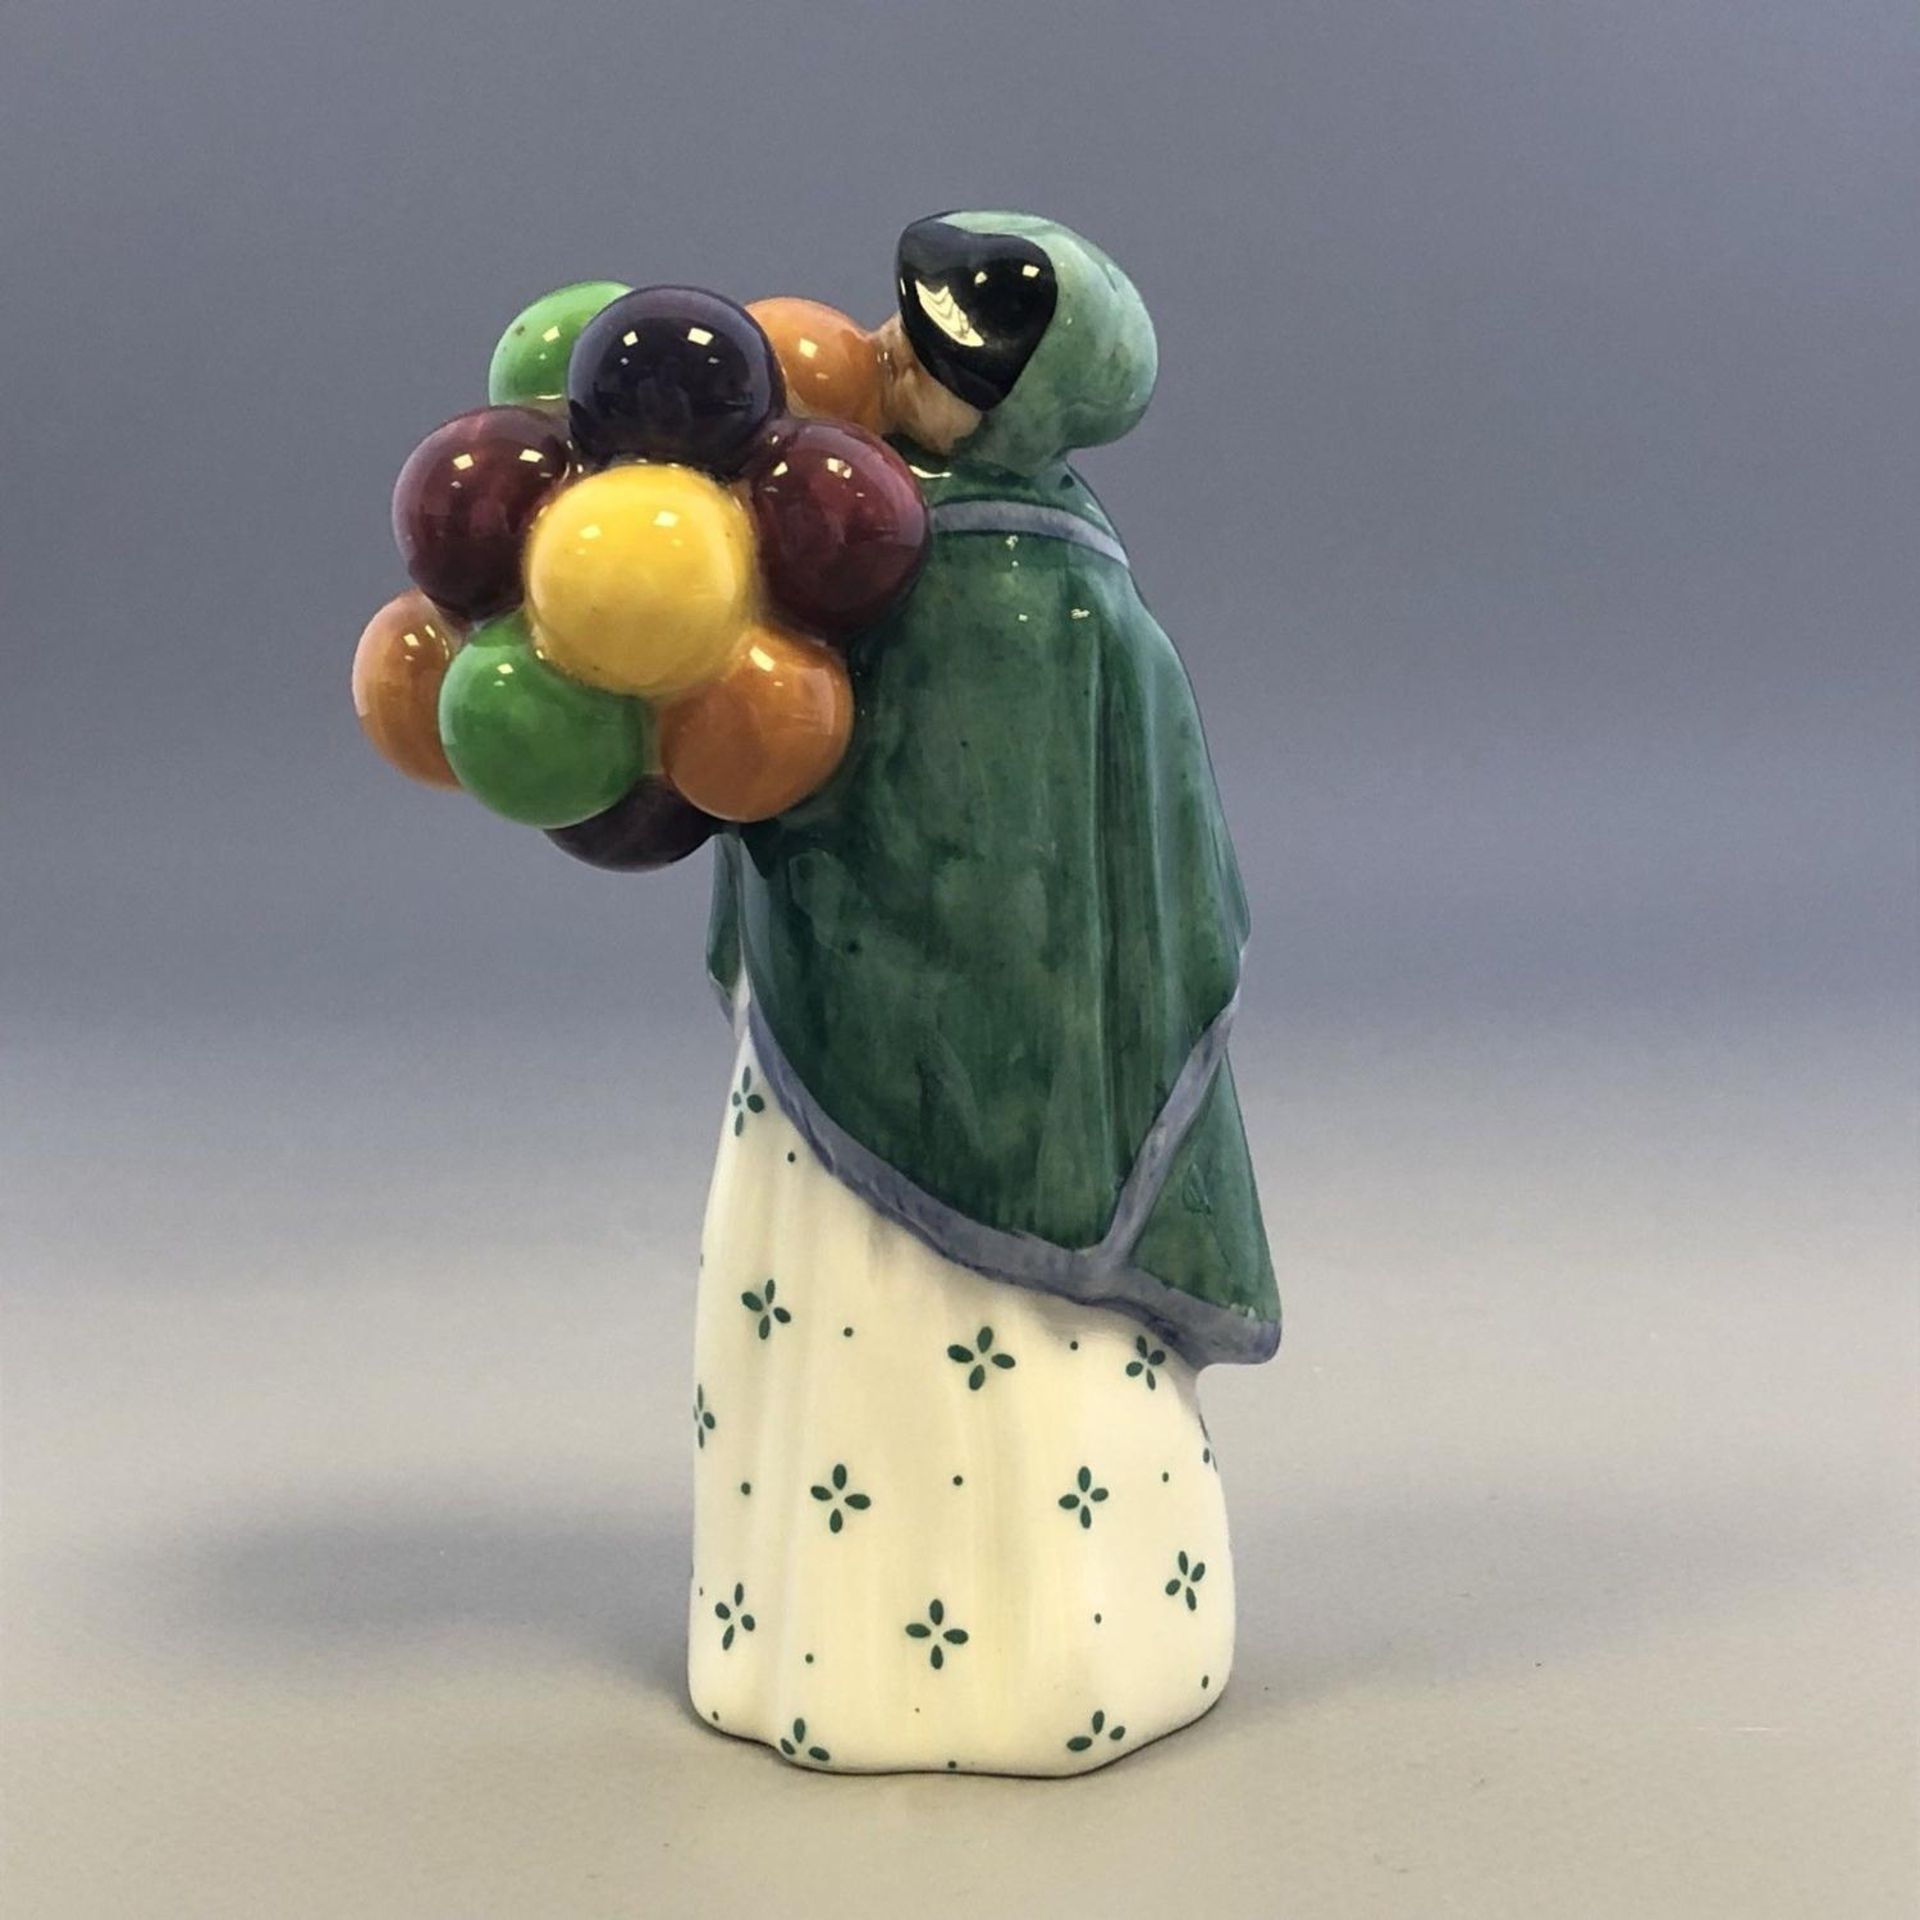 Miniature Royal Doulton Porcelain Figurine - HN 2130 THE BALLOON SELLER with baby - Image 3 of 6